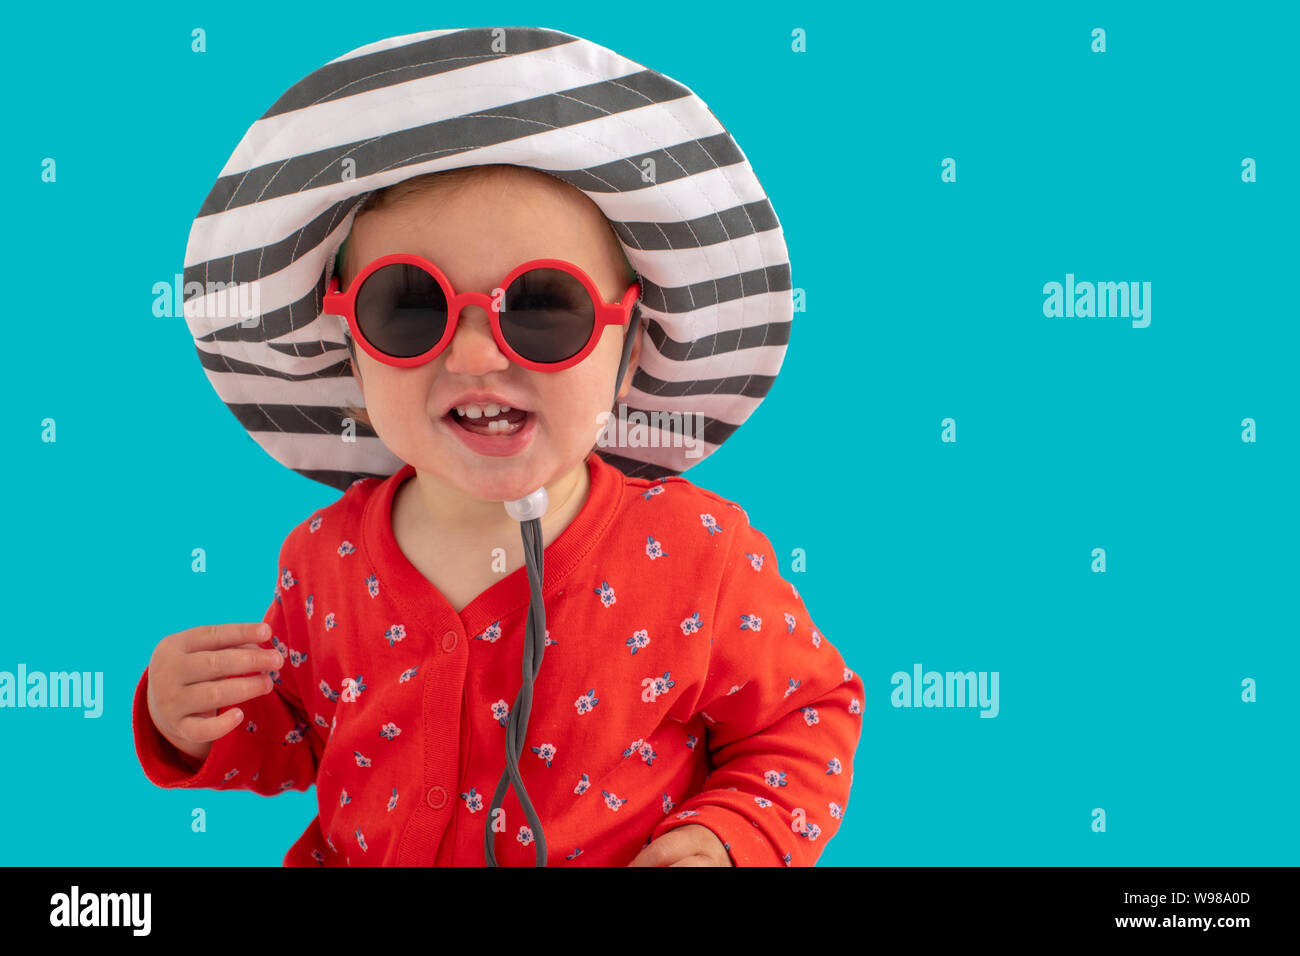 Funny little kid in hat and sunglasses Stock Photo